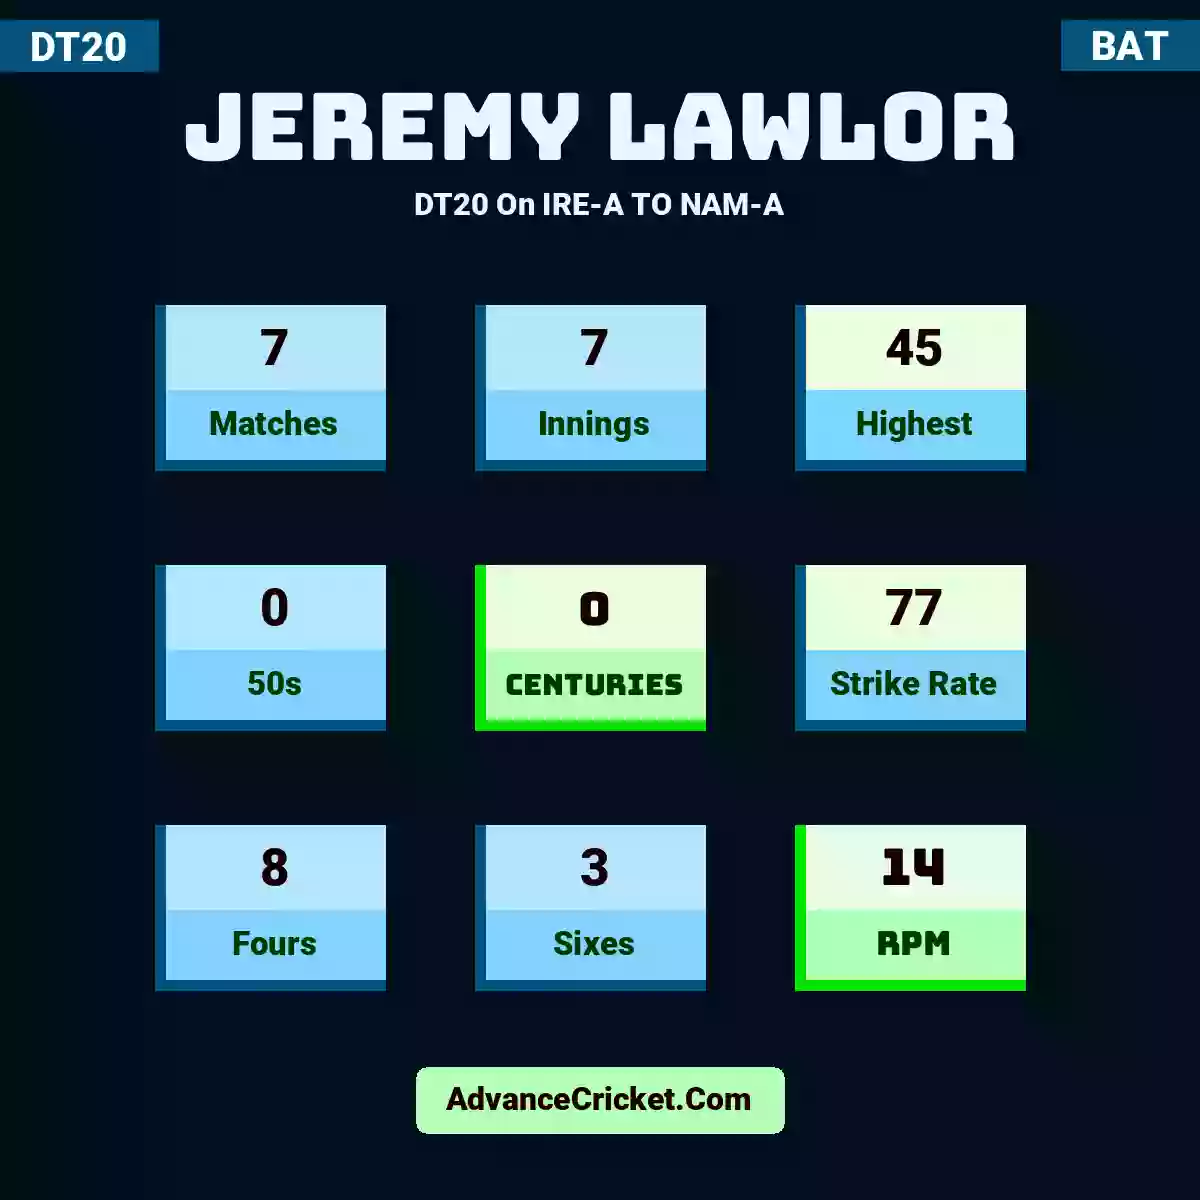 Jeremy Lawlor DT20  On IRE-A TO NAM-A, Jeremy Lawlor played 7 matches, scored 45 runs as highest, 0 half-centuries, and 0 centuries, with a strike rate of 77. J.Lawlor hit 8 fours and 3 sixes, with an RPM of 14.